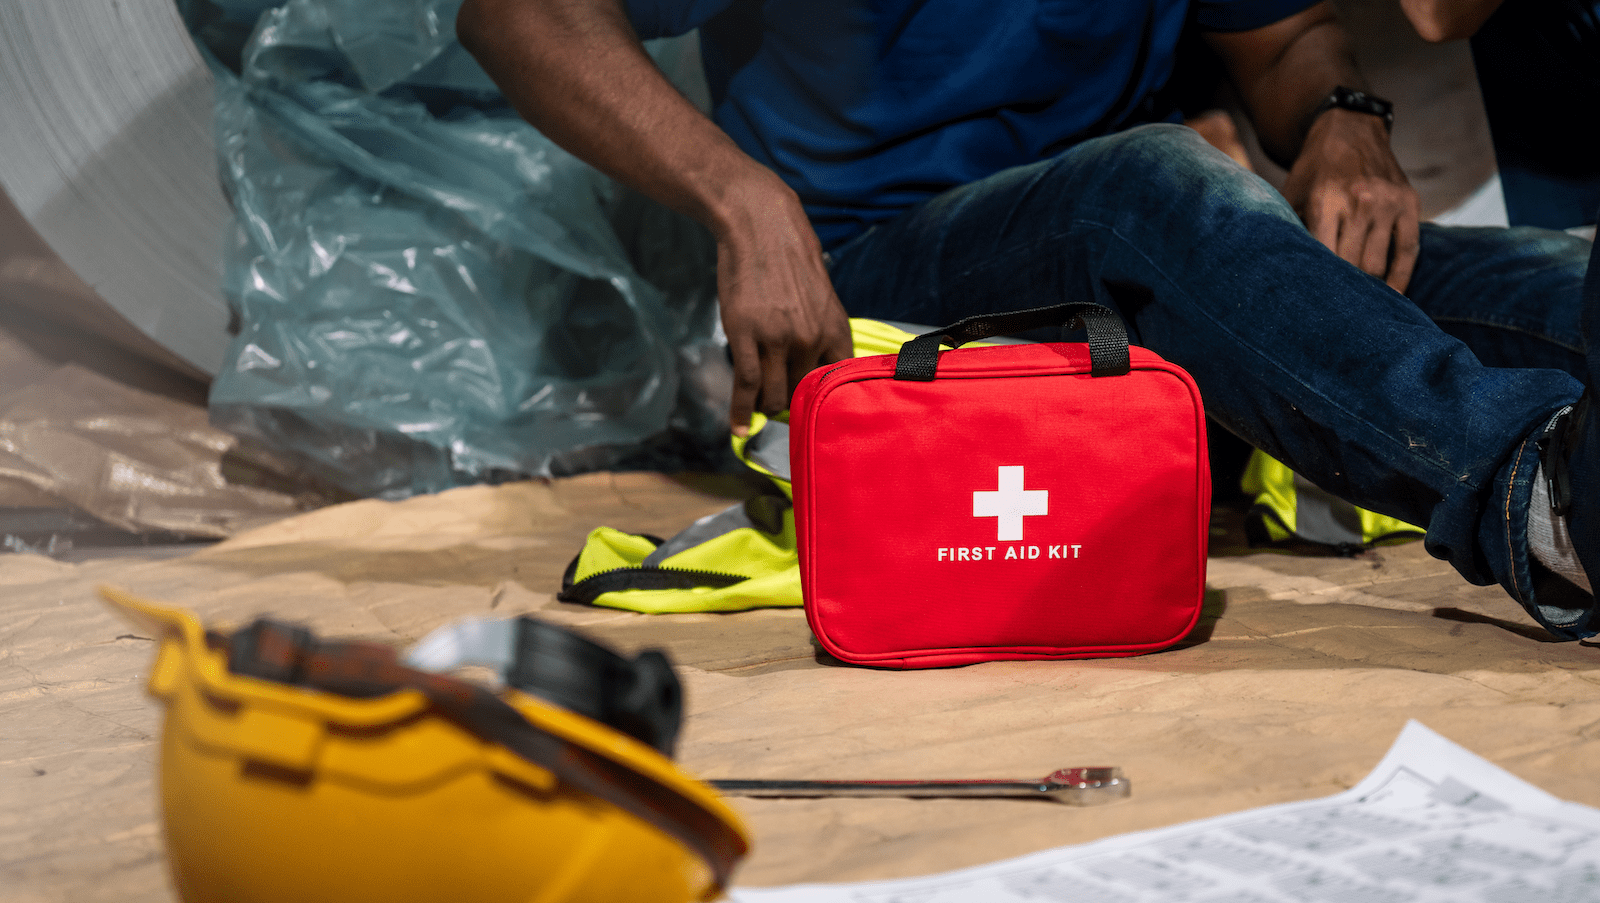 First aid kit on construction site contains naloxone for opioid overdoses